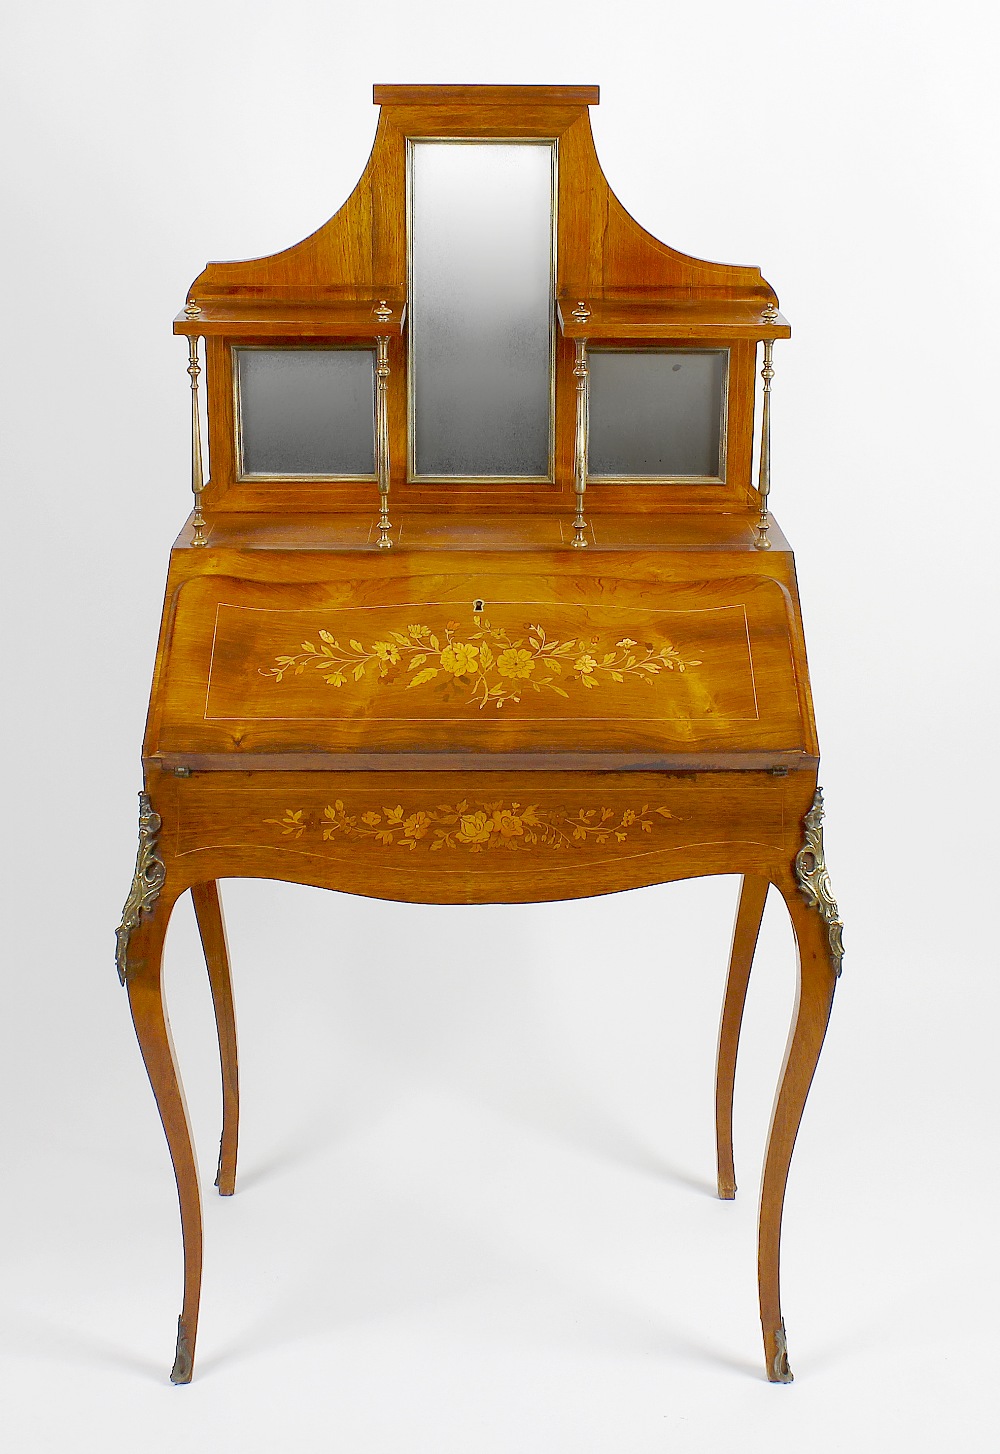 An inlaid rosewood bureau de dame. Circa 1900, the shaped superstructure with central long mirror